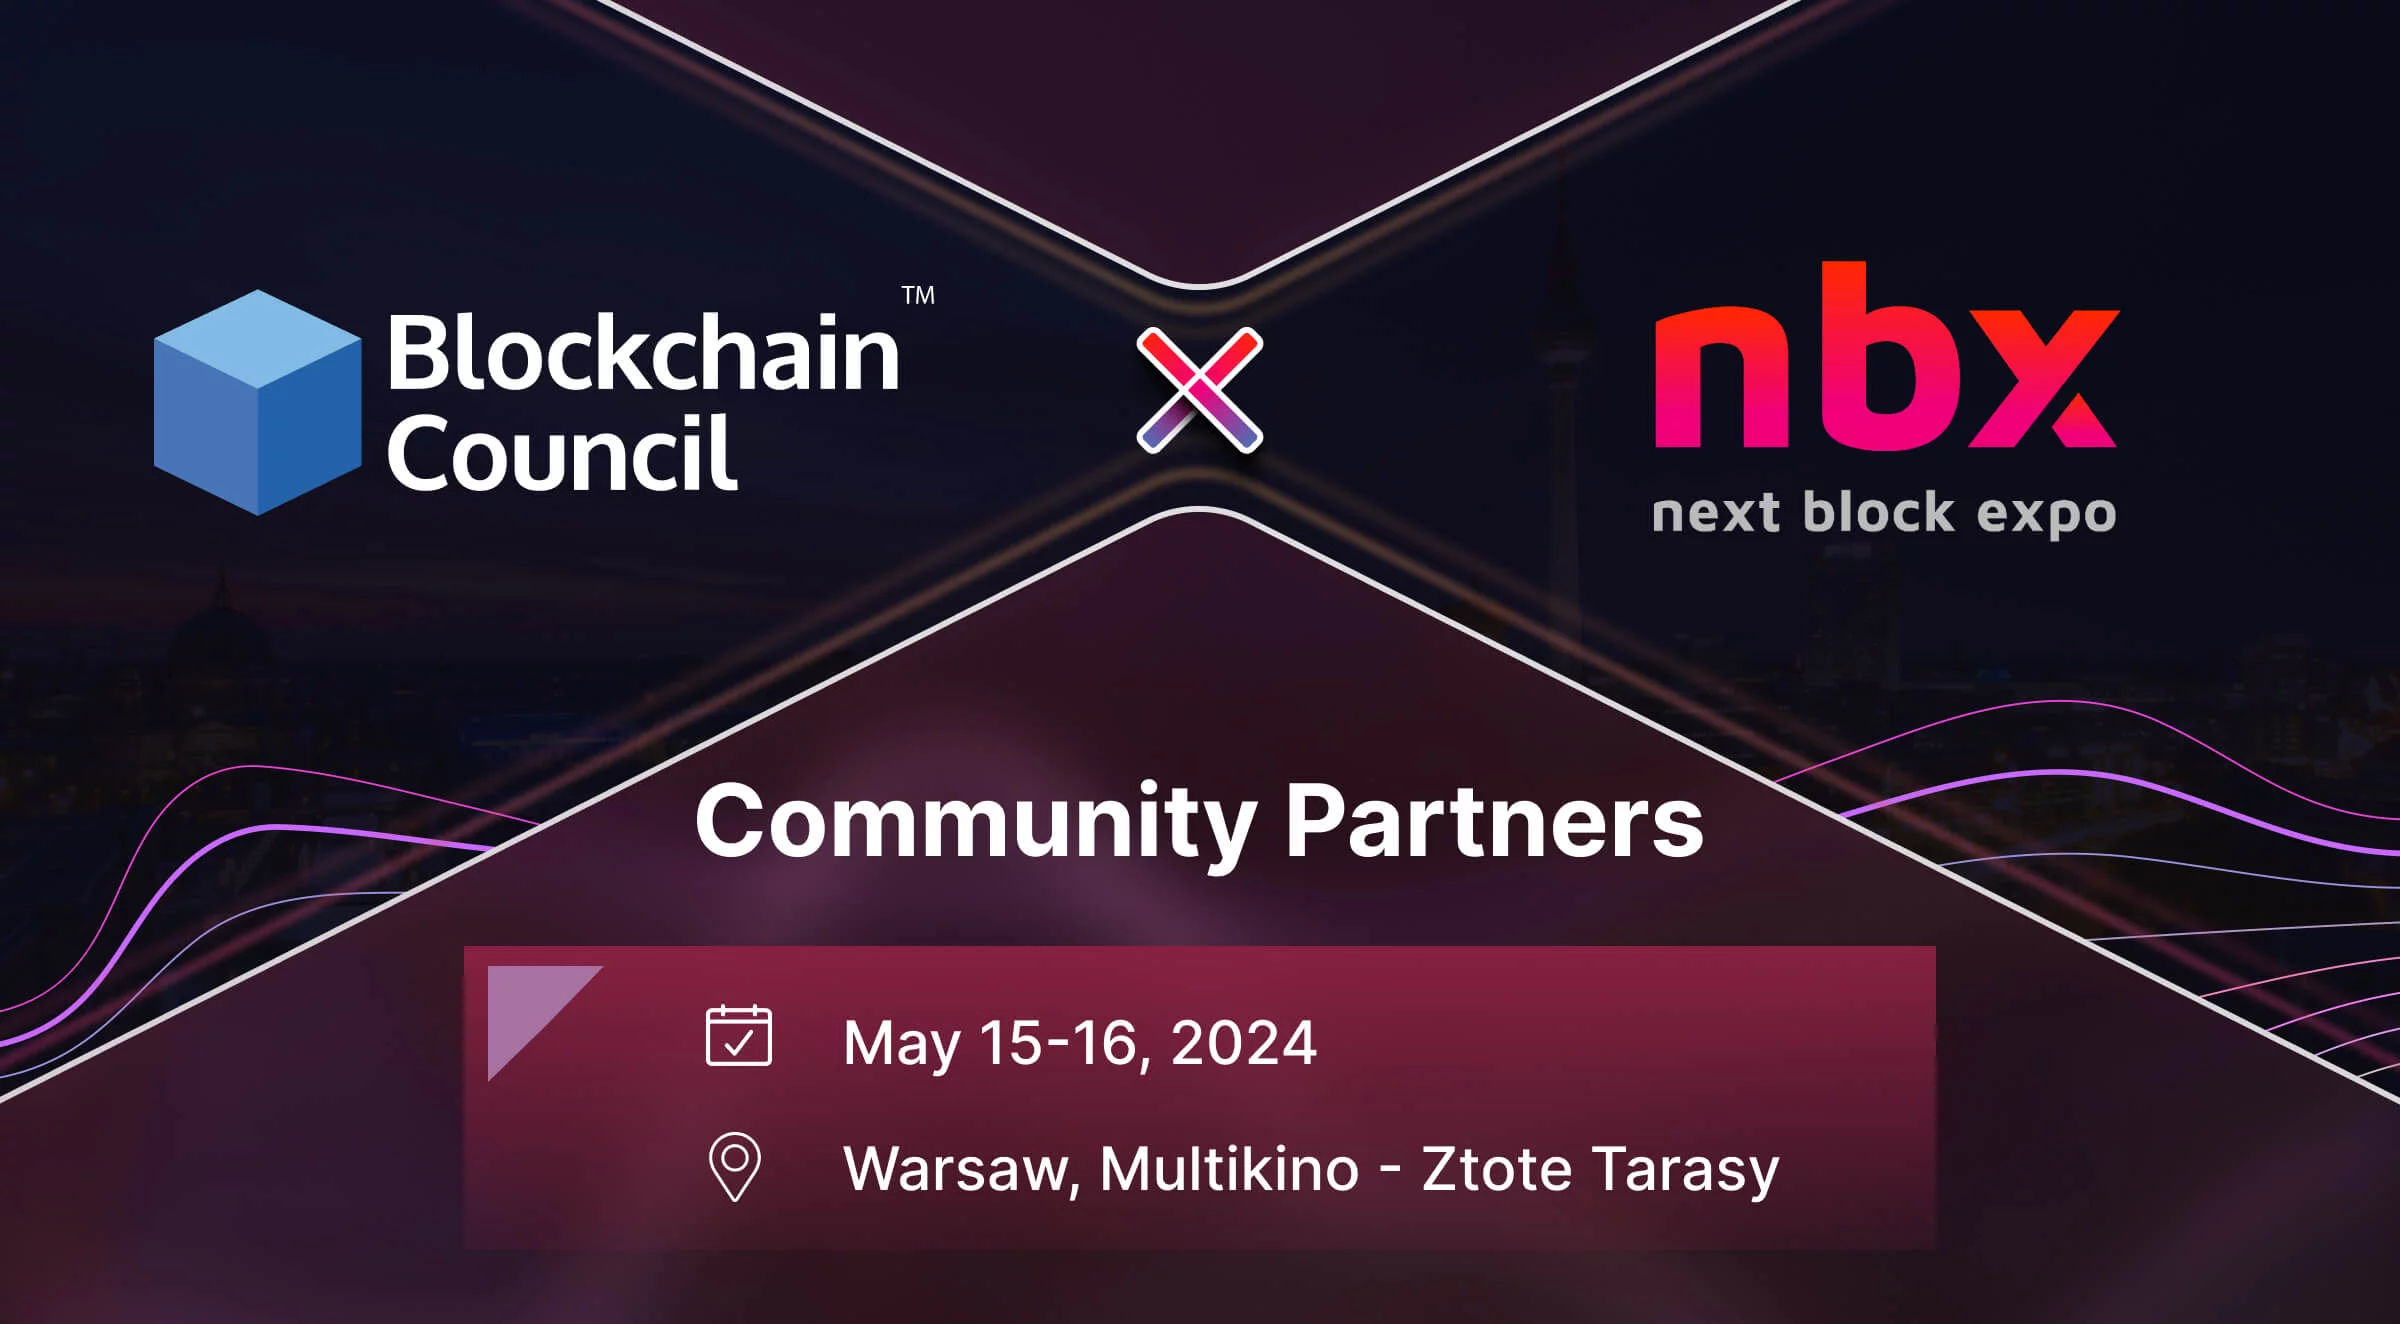 Blockchain Council Joins the Next Block Expo 2024 as Its Official Community Partner